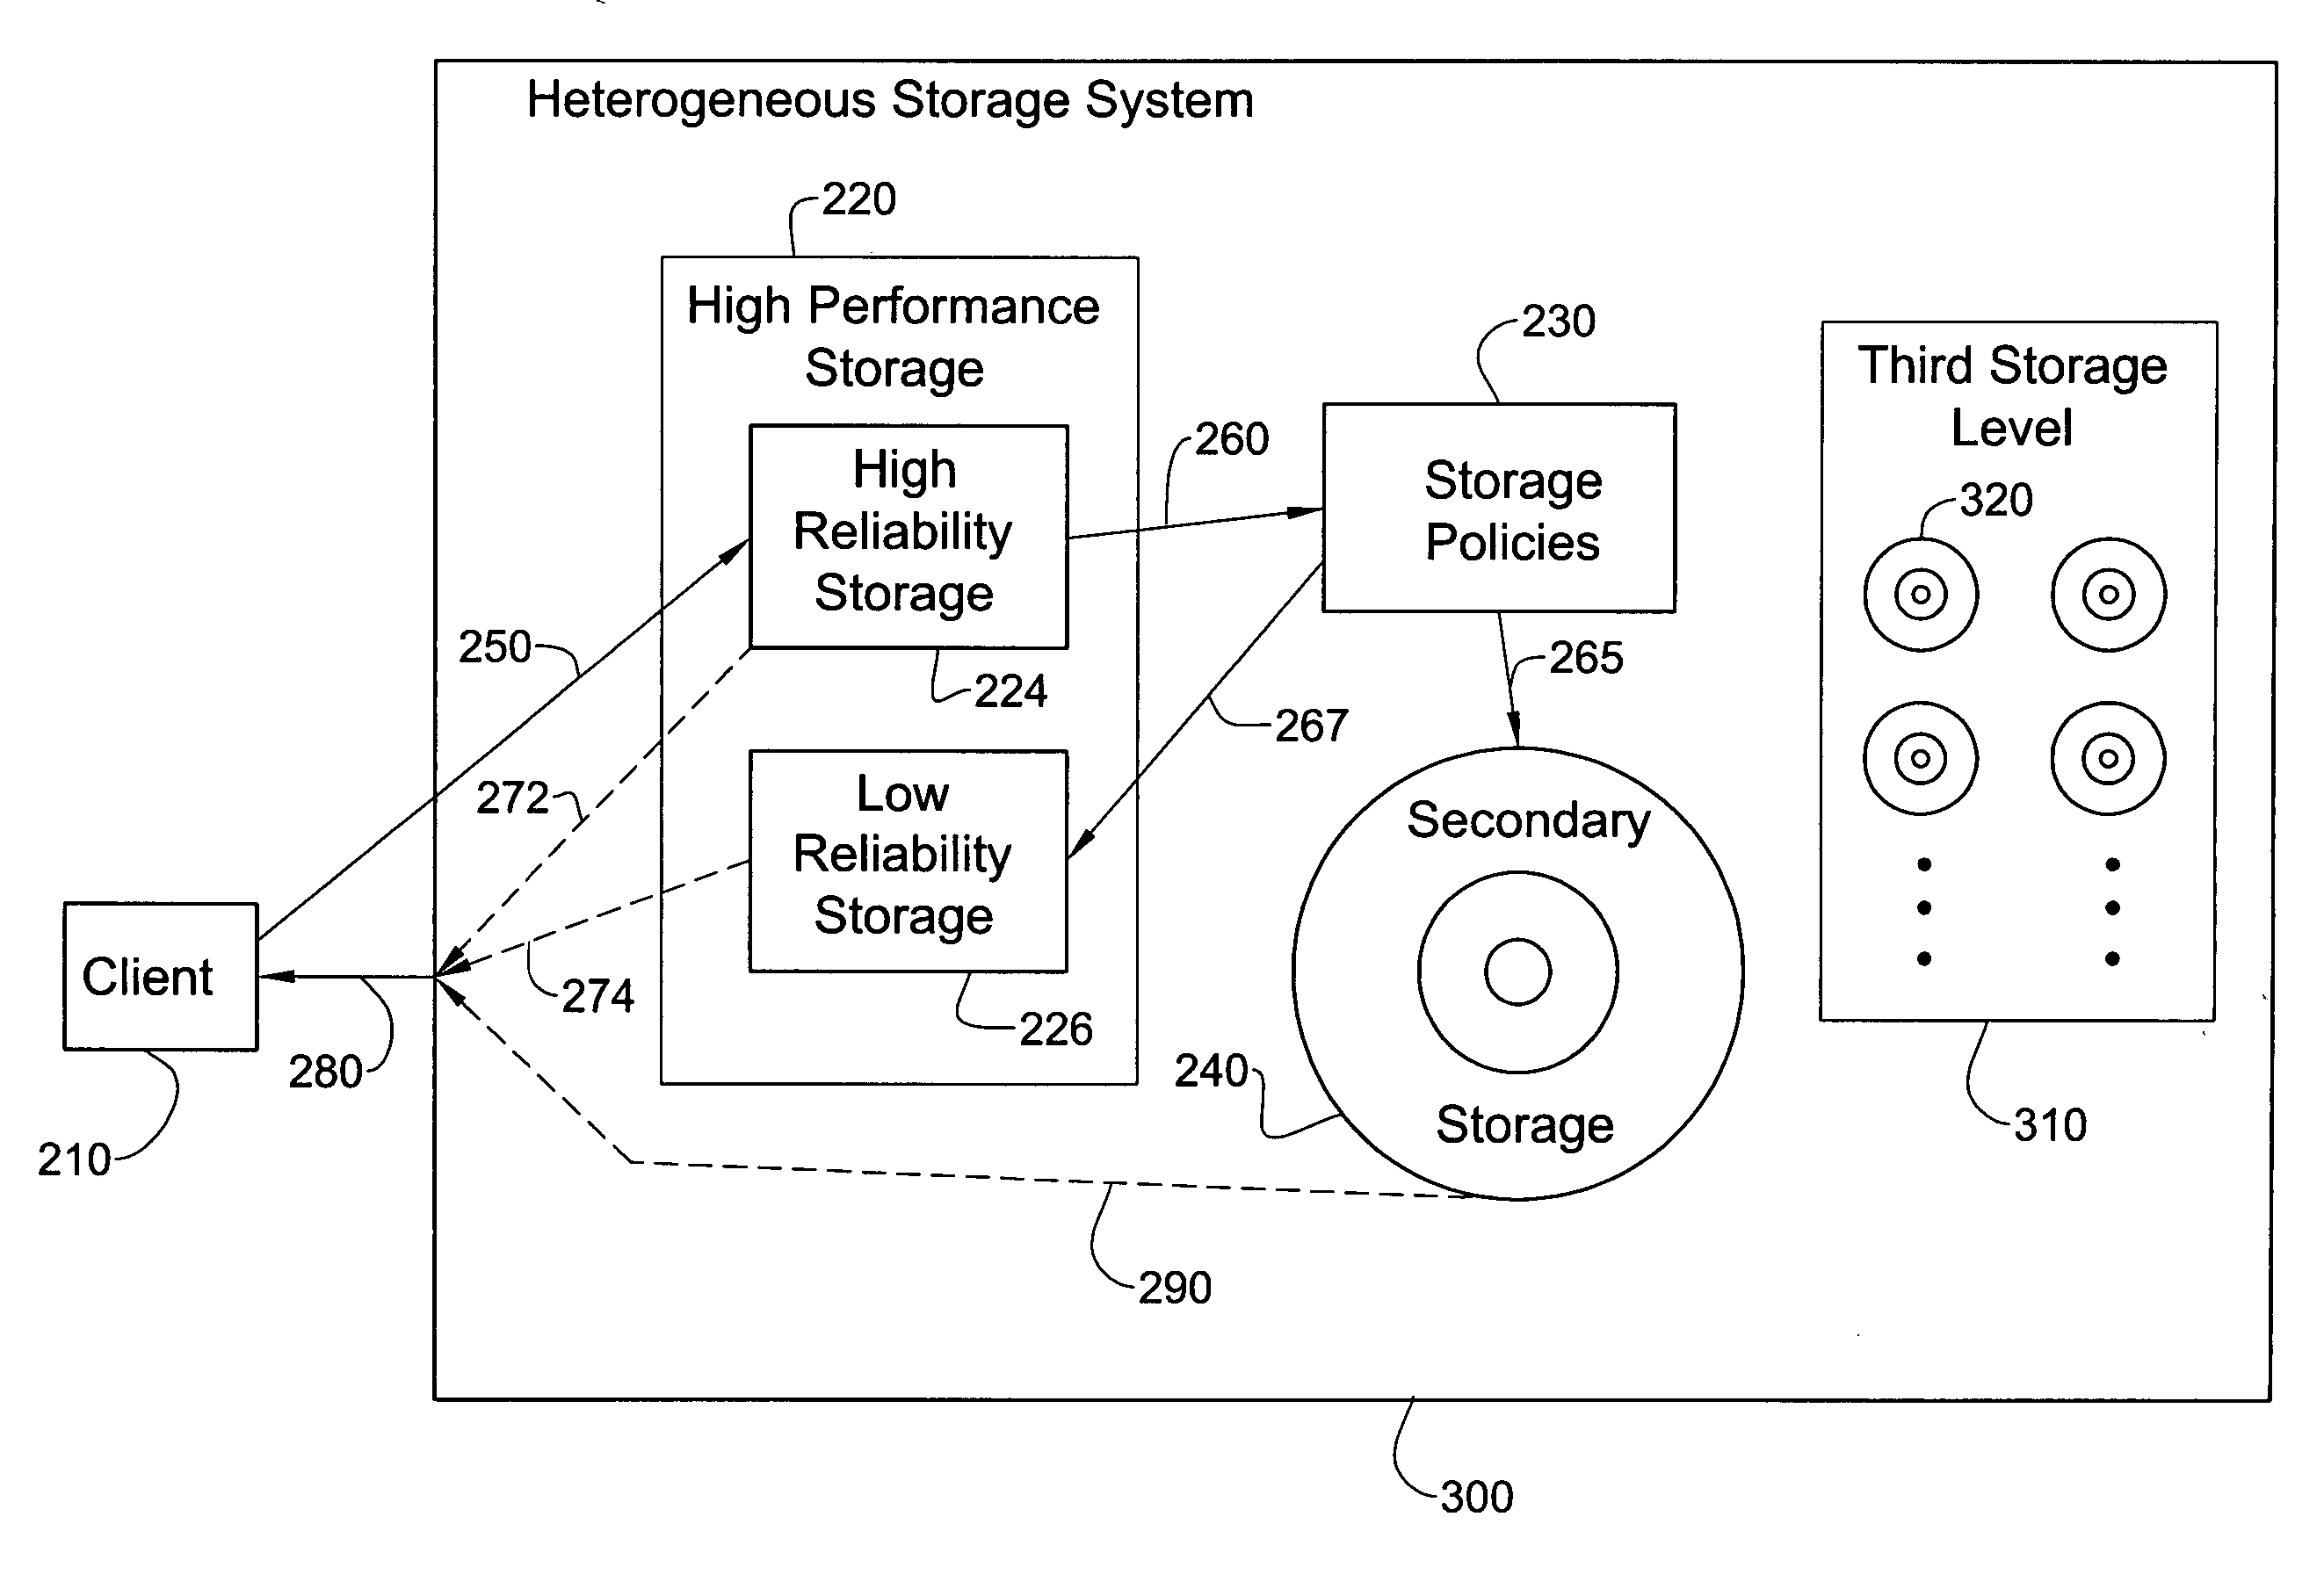 Inexpensive reliable computer storage via hetero-geneous architecture and a staged storage policy